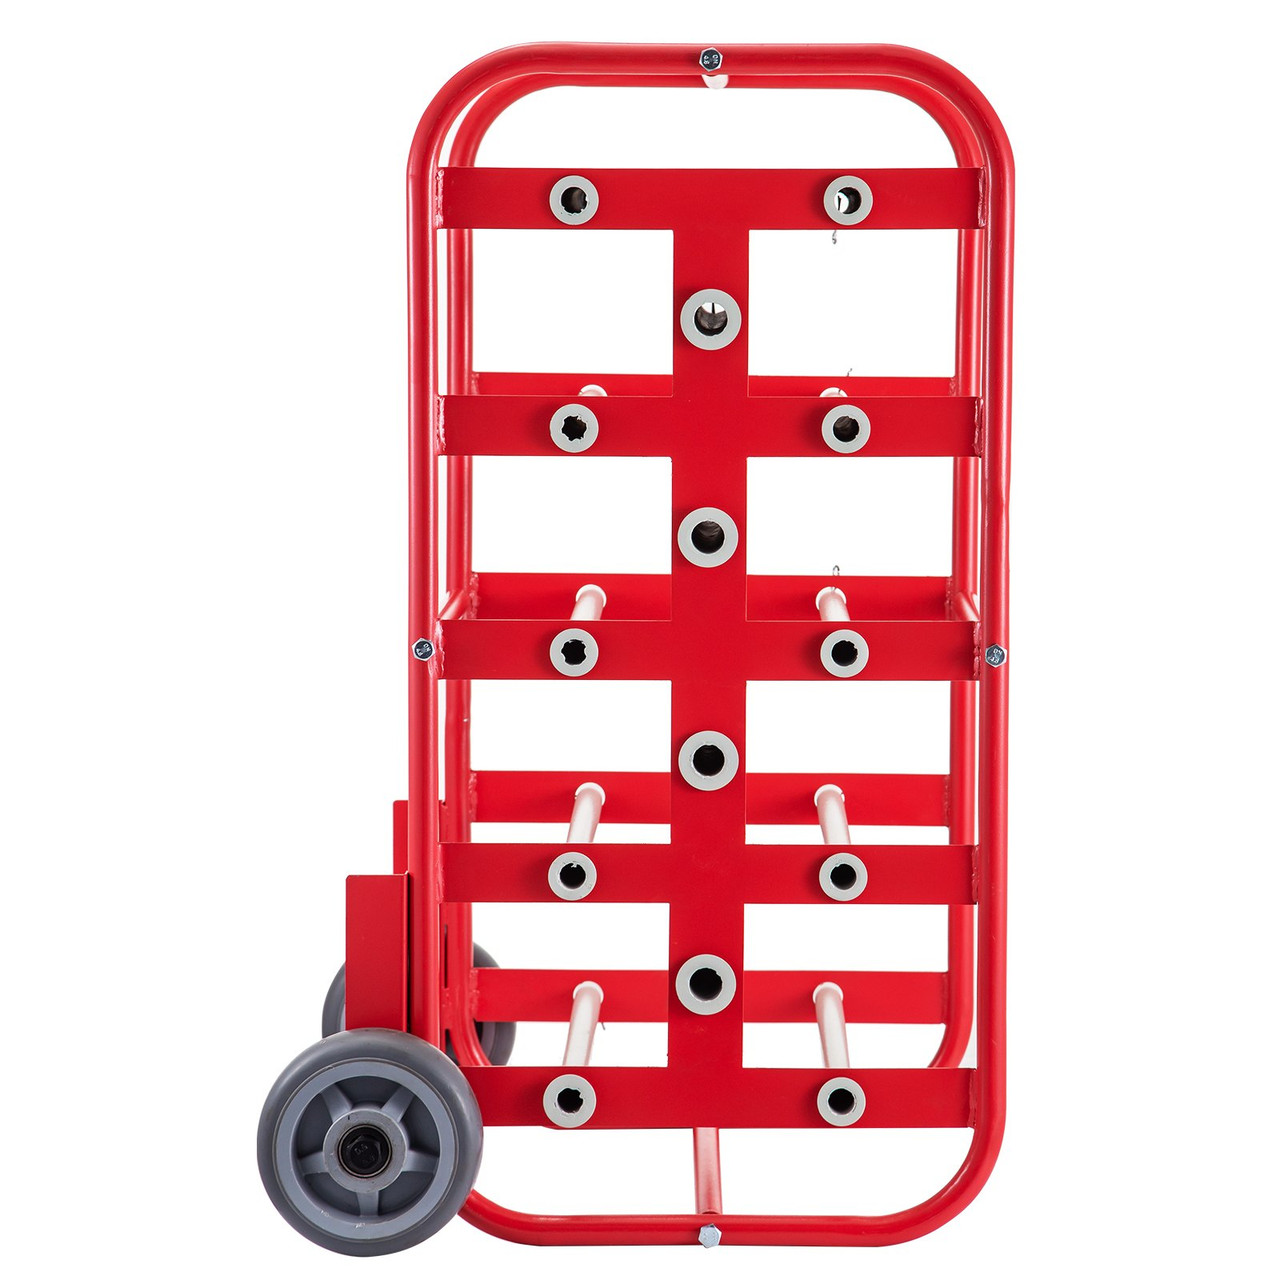 BISupply Wire Spool Rack Cable Caddy, Red - Wiring Spool Dispenser